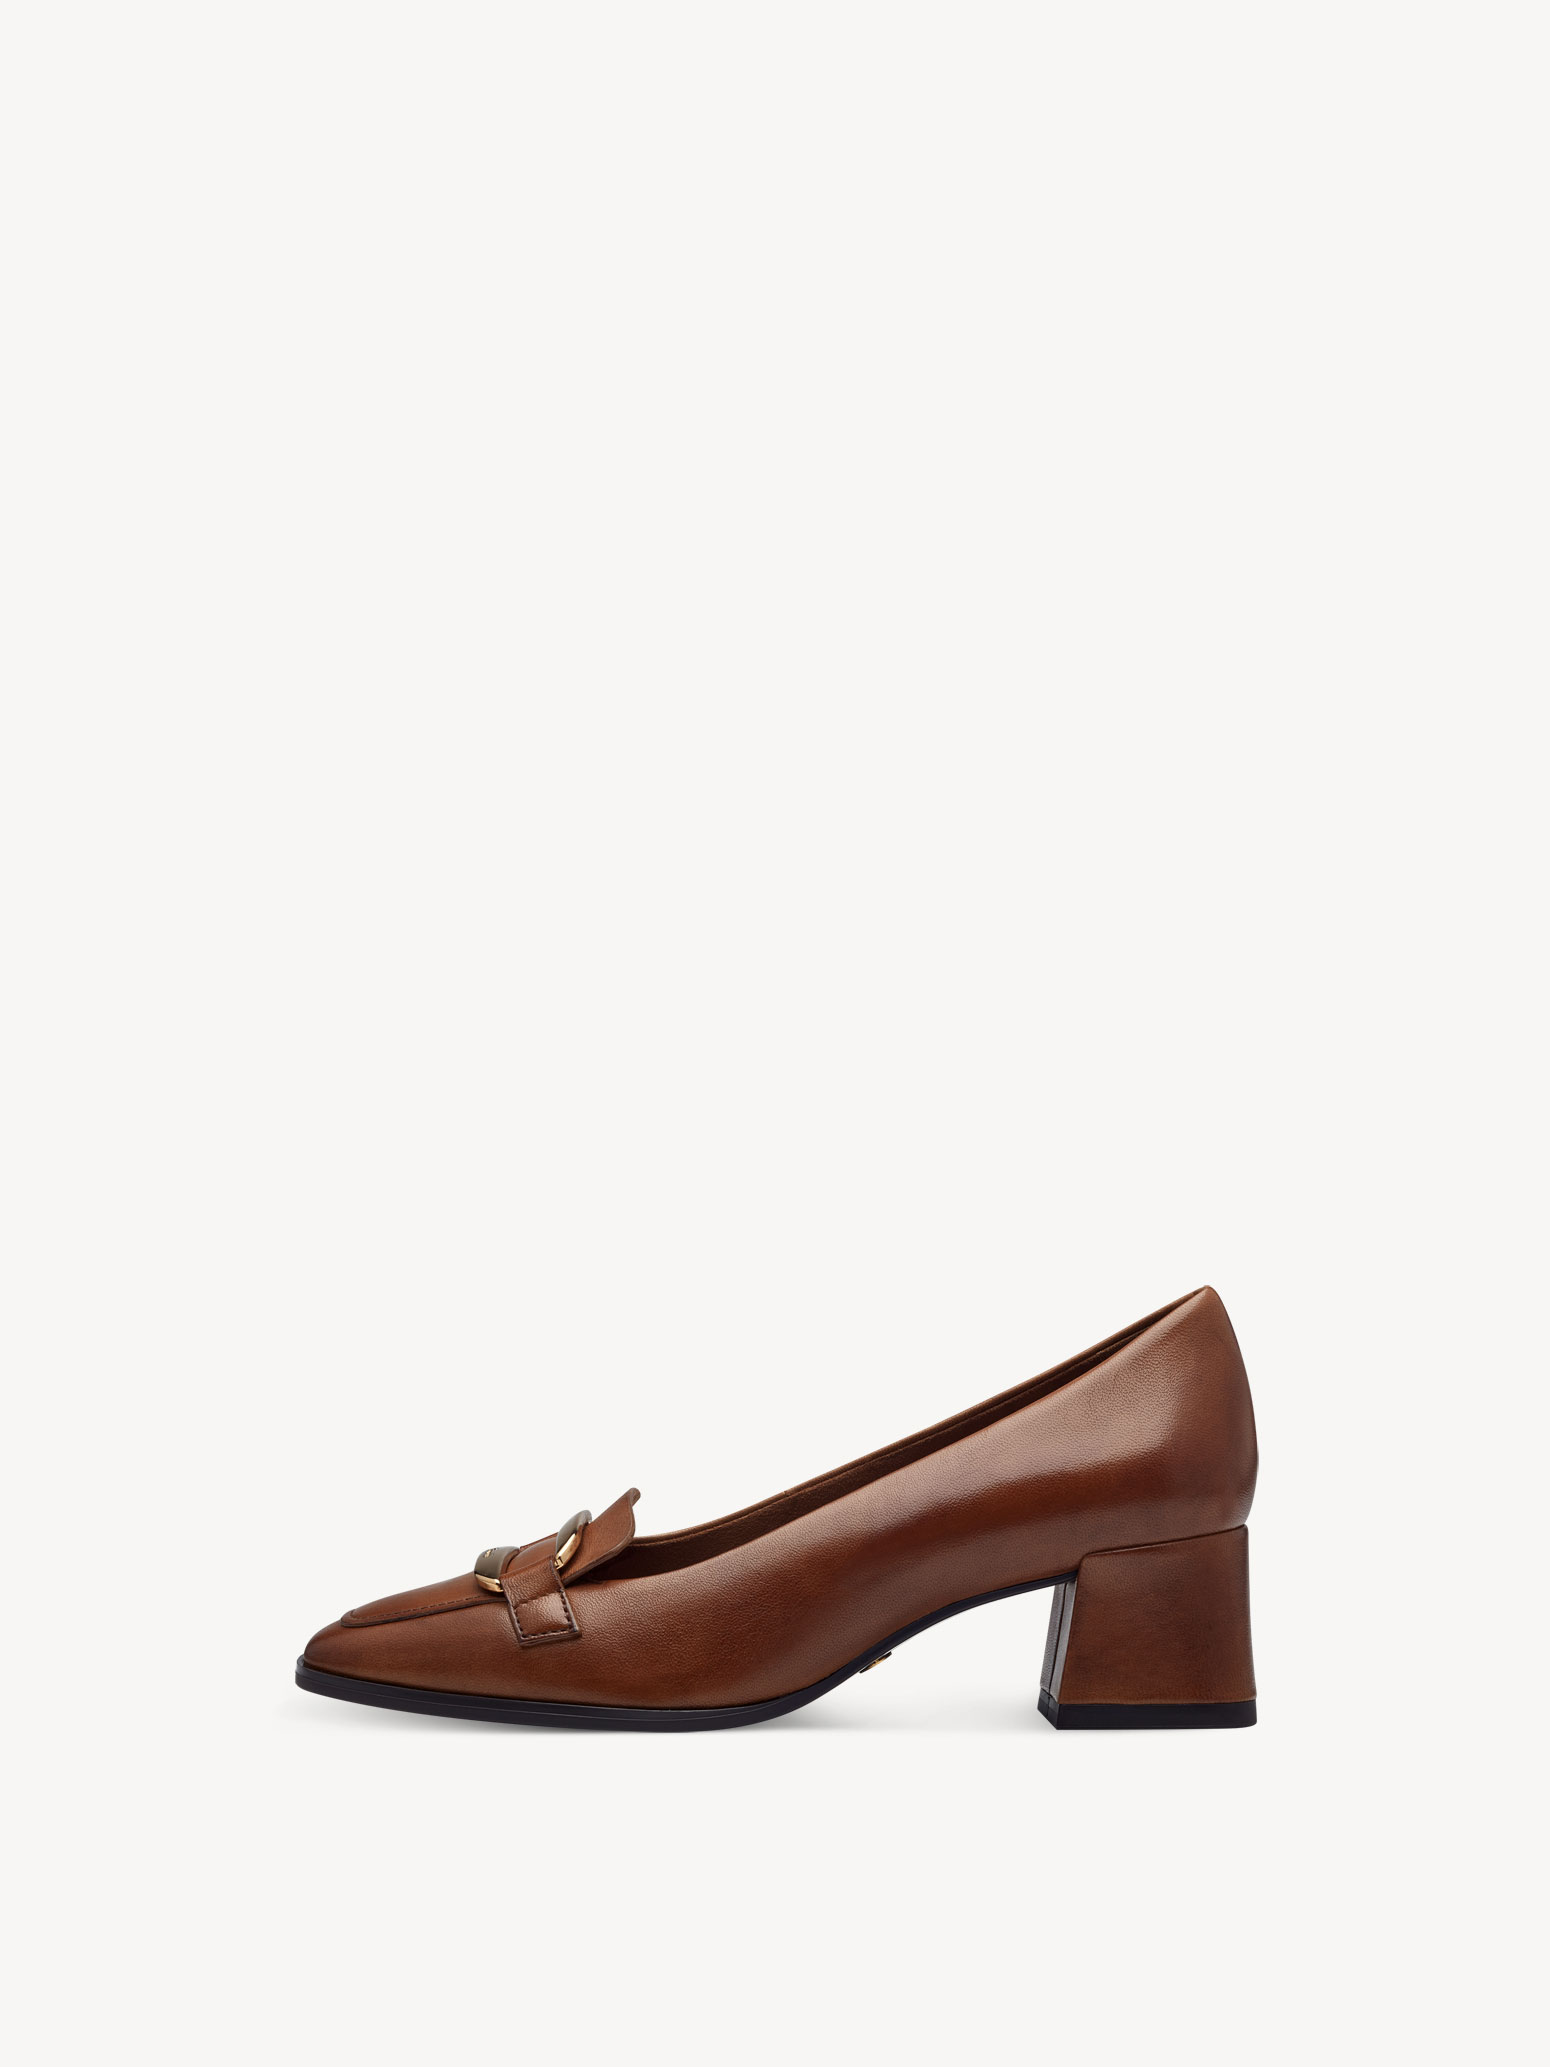 Leather Pumps - brown